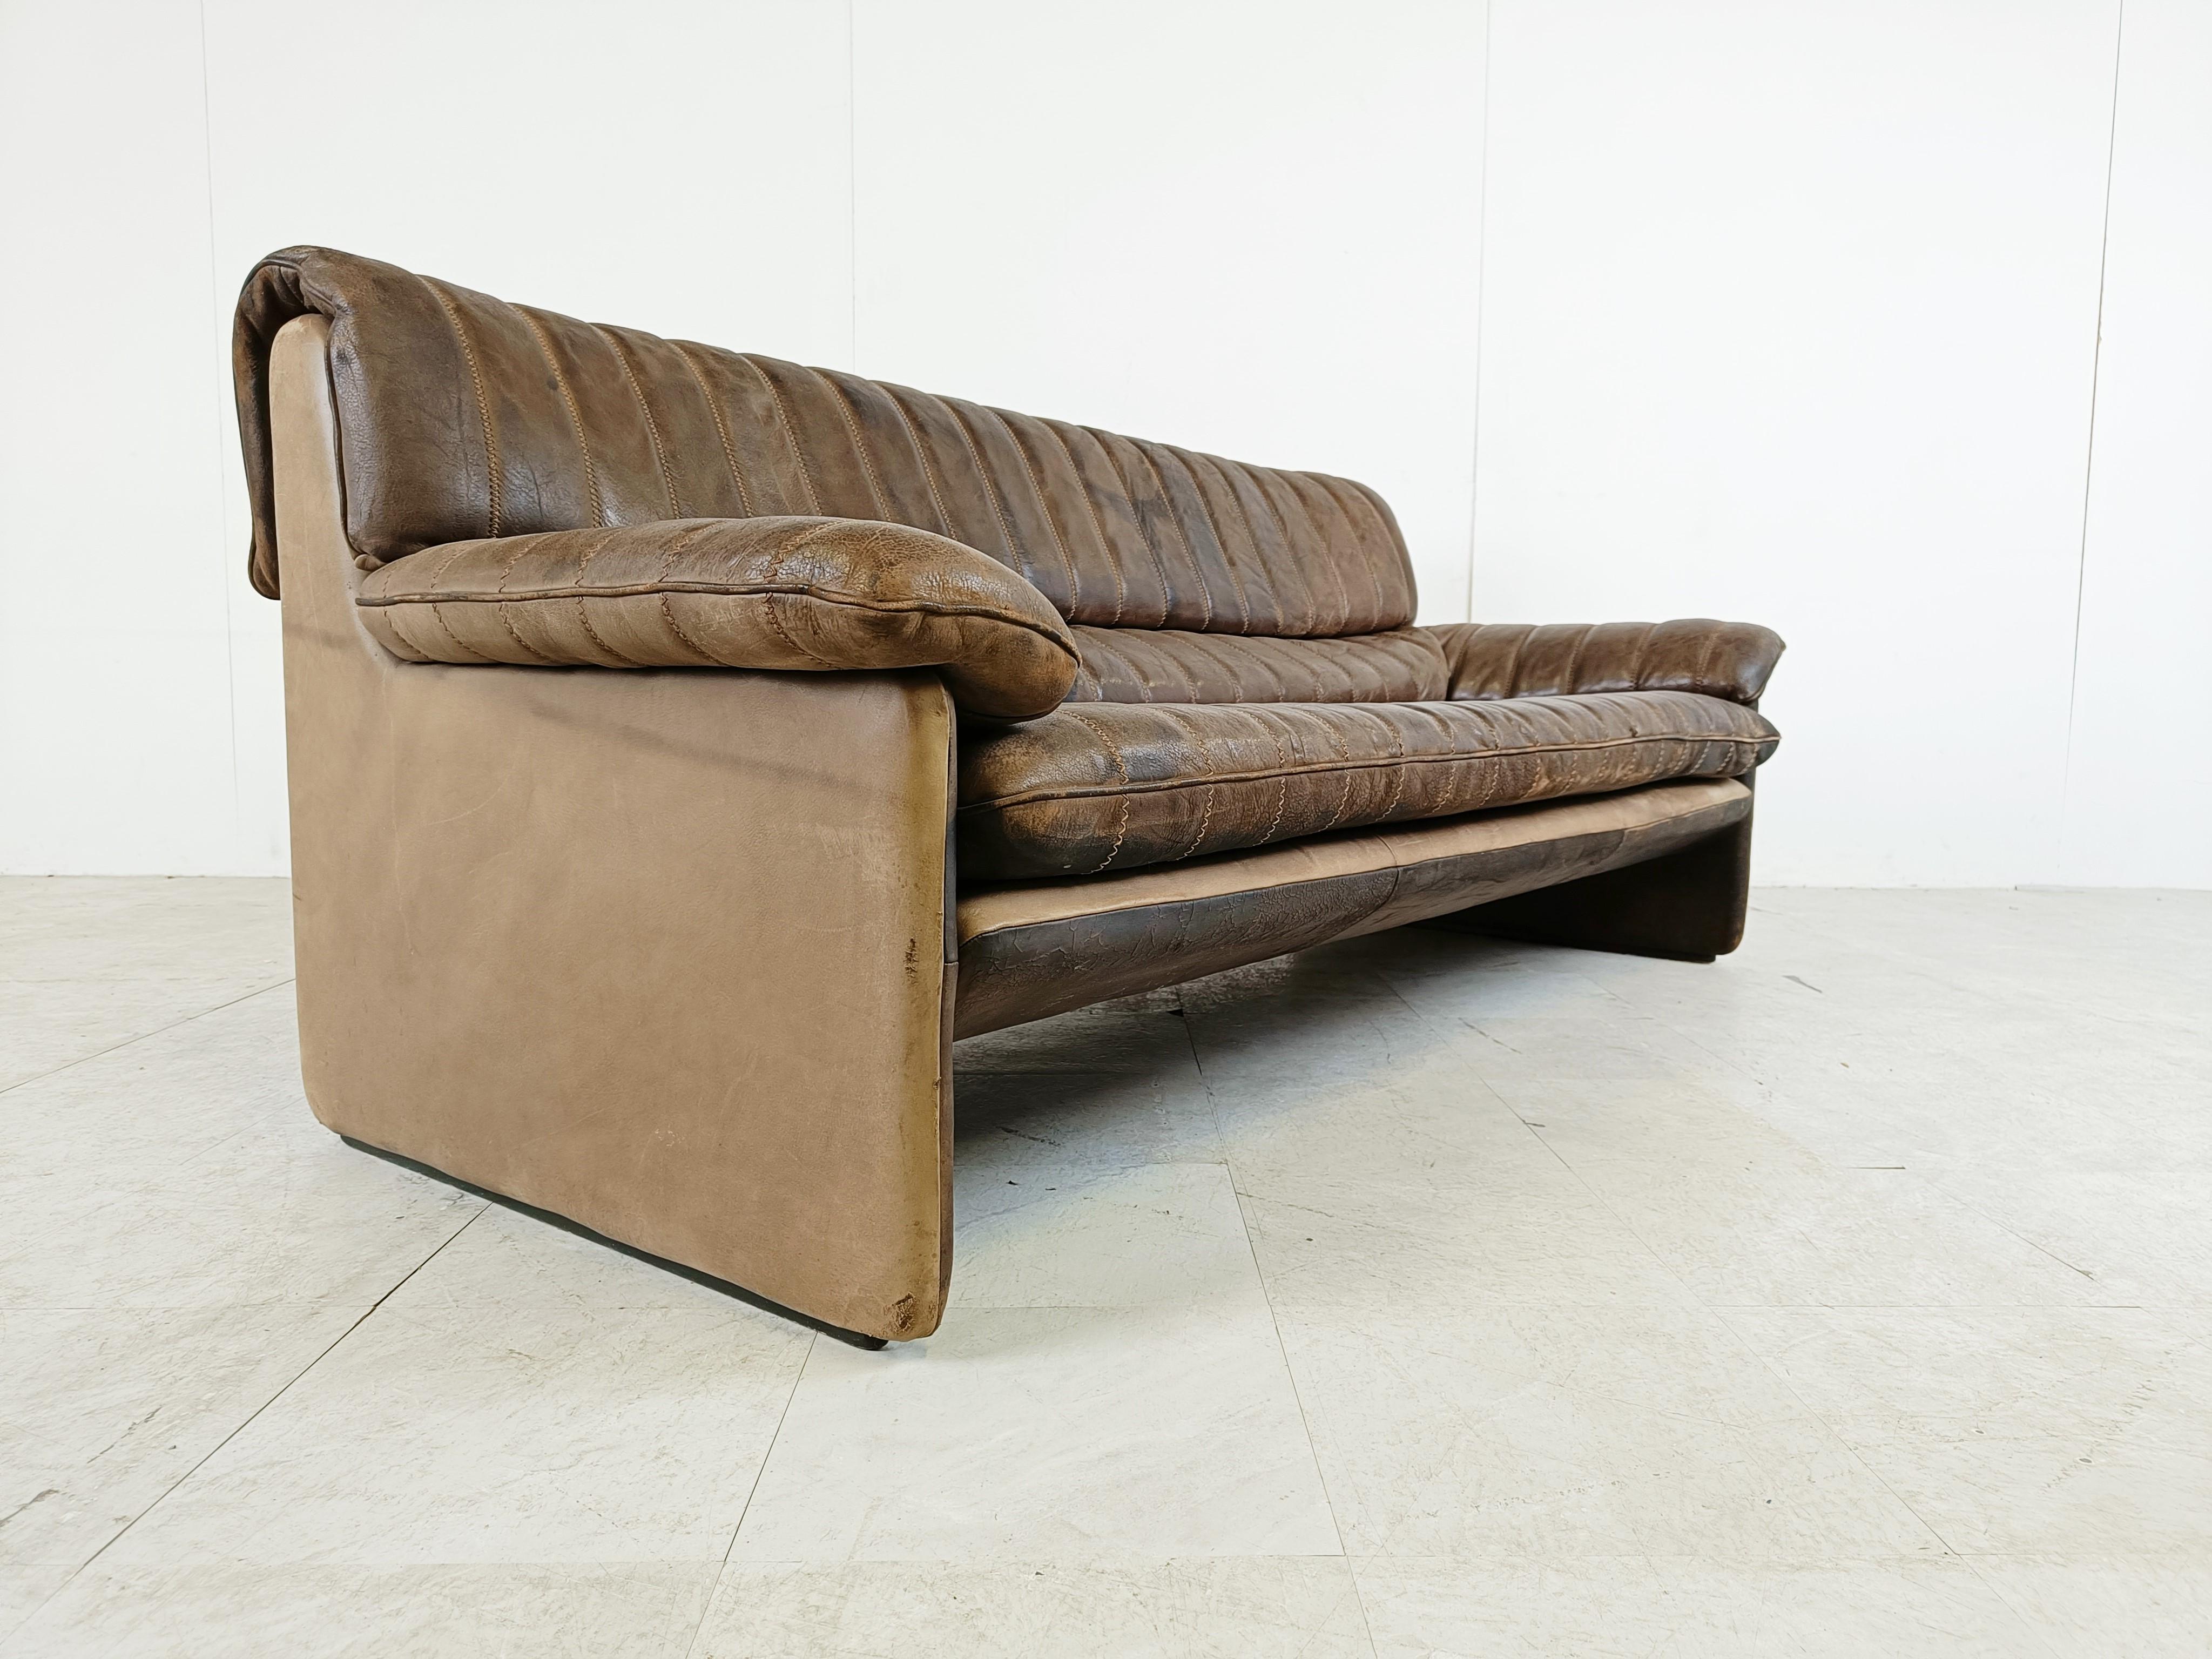 De Sede Ds86 Sofa in Brown Leather, 1970s For Sale 3